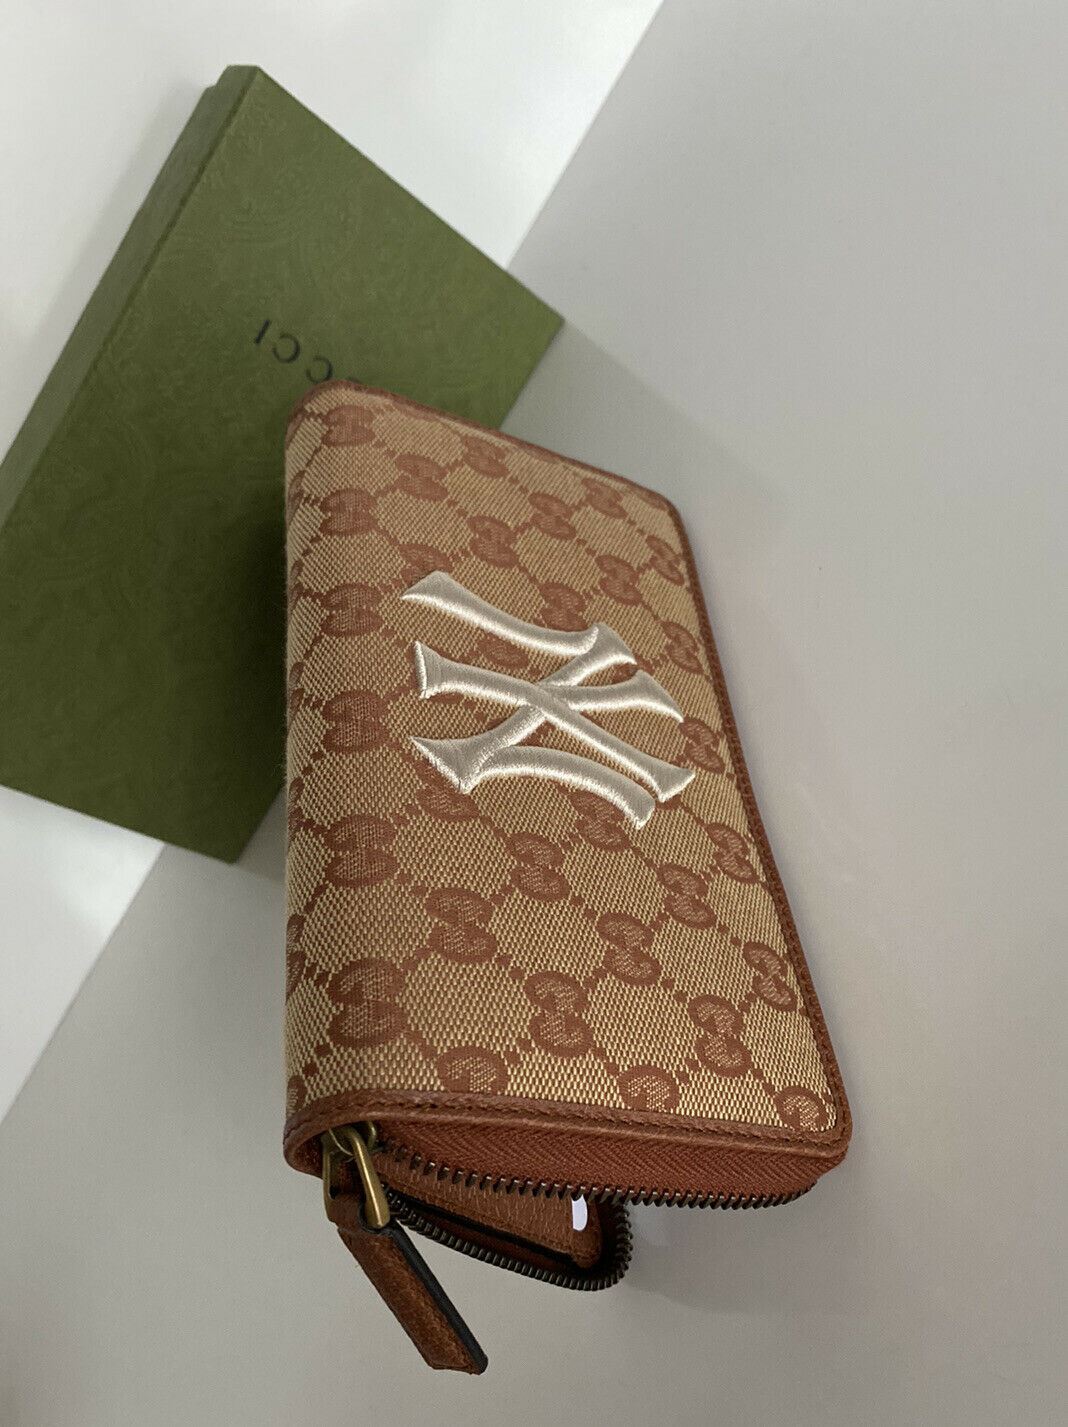 New Gucci GG NY Yankees Zip Around Fabric Wallet Beige Made in Italy